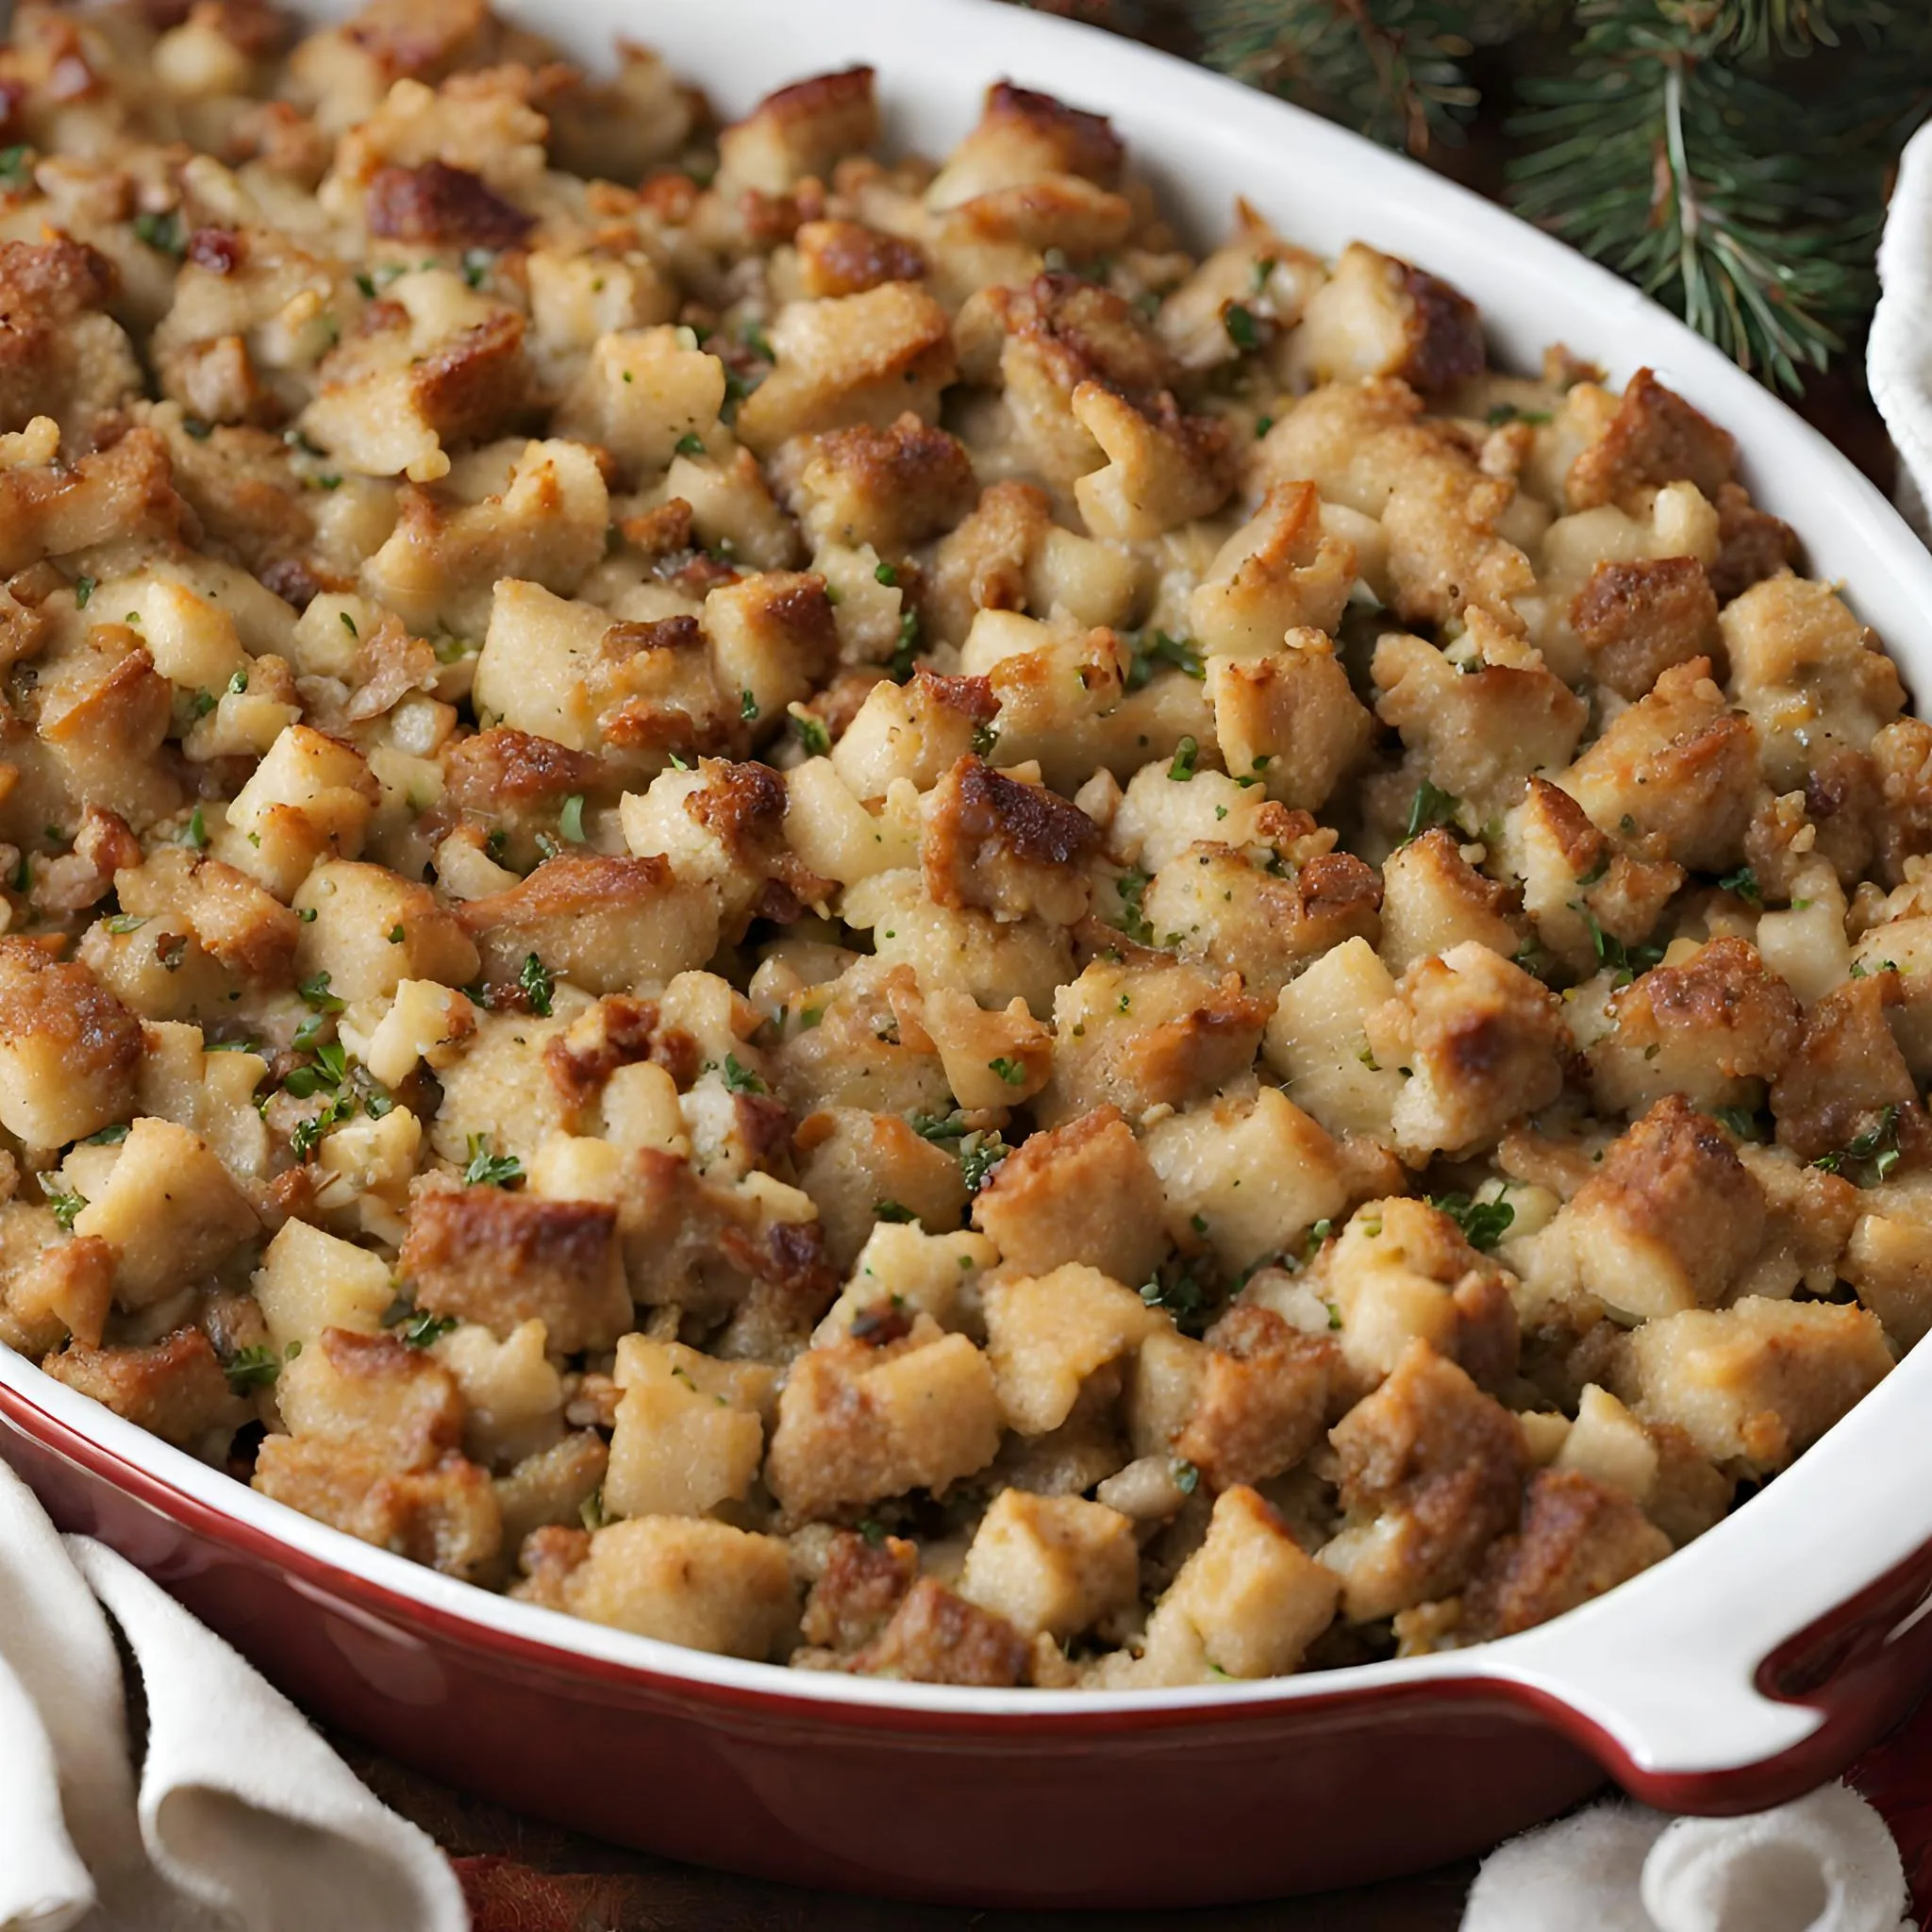 Stuffing, a savory dish popular during the holiday season